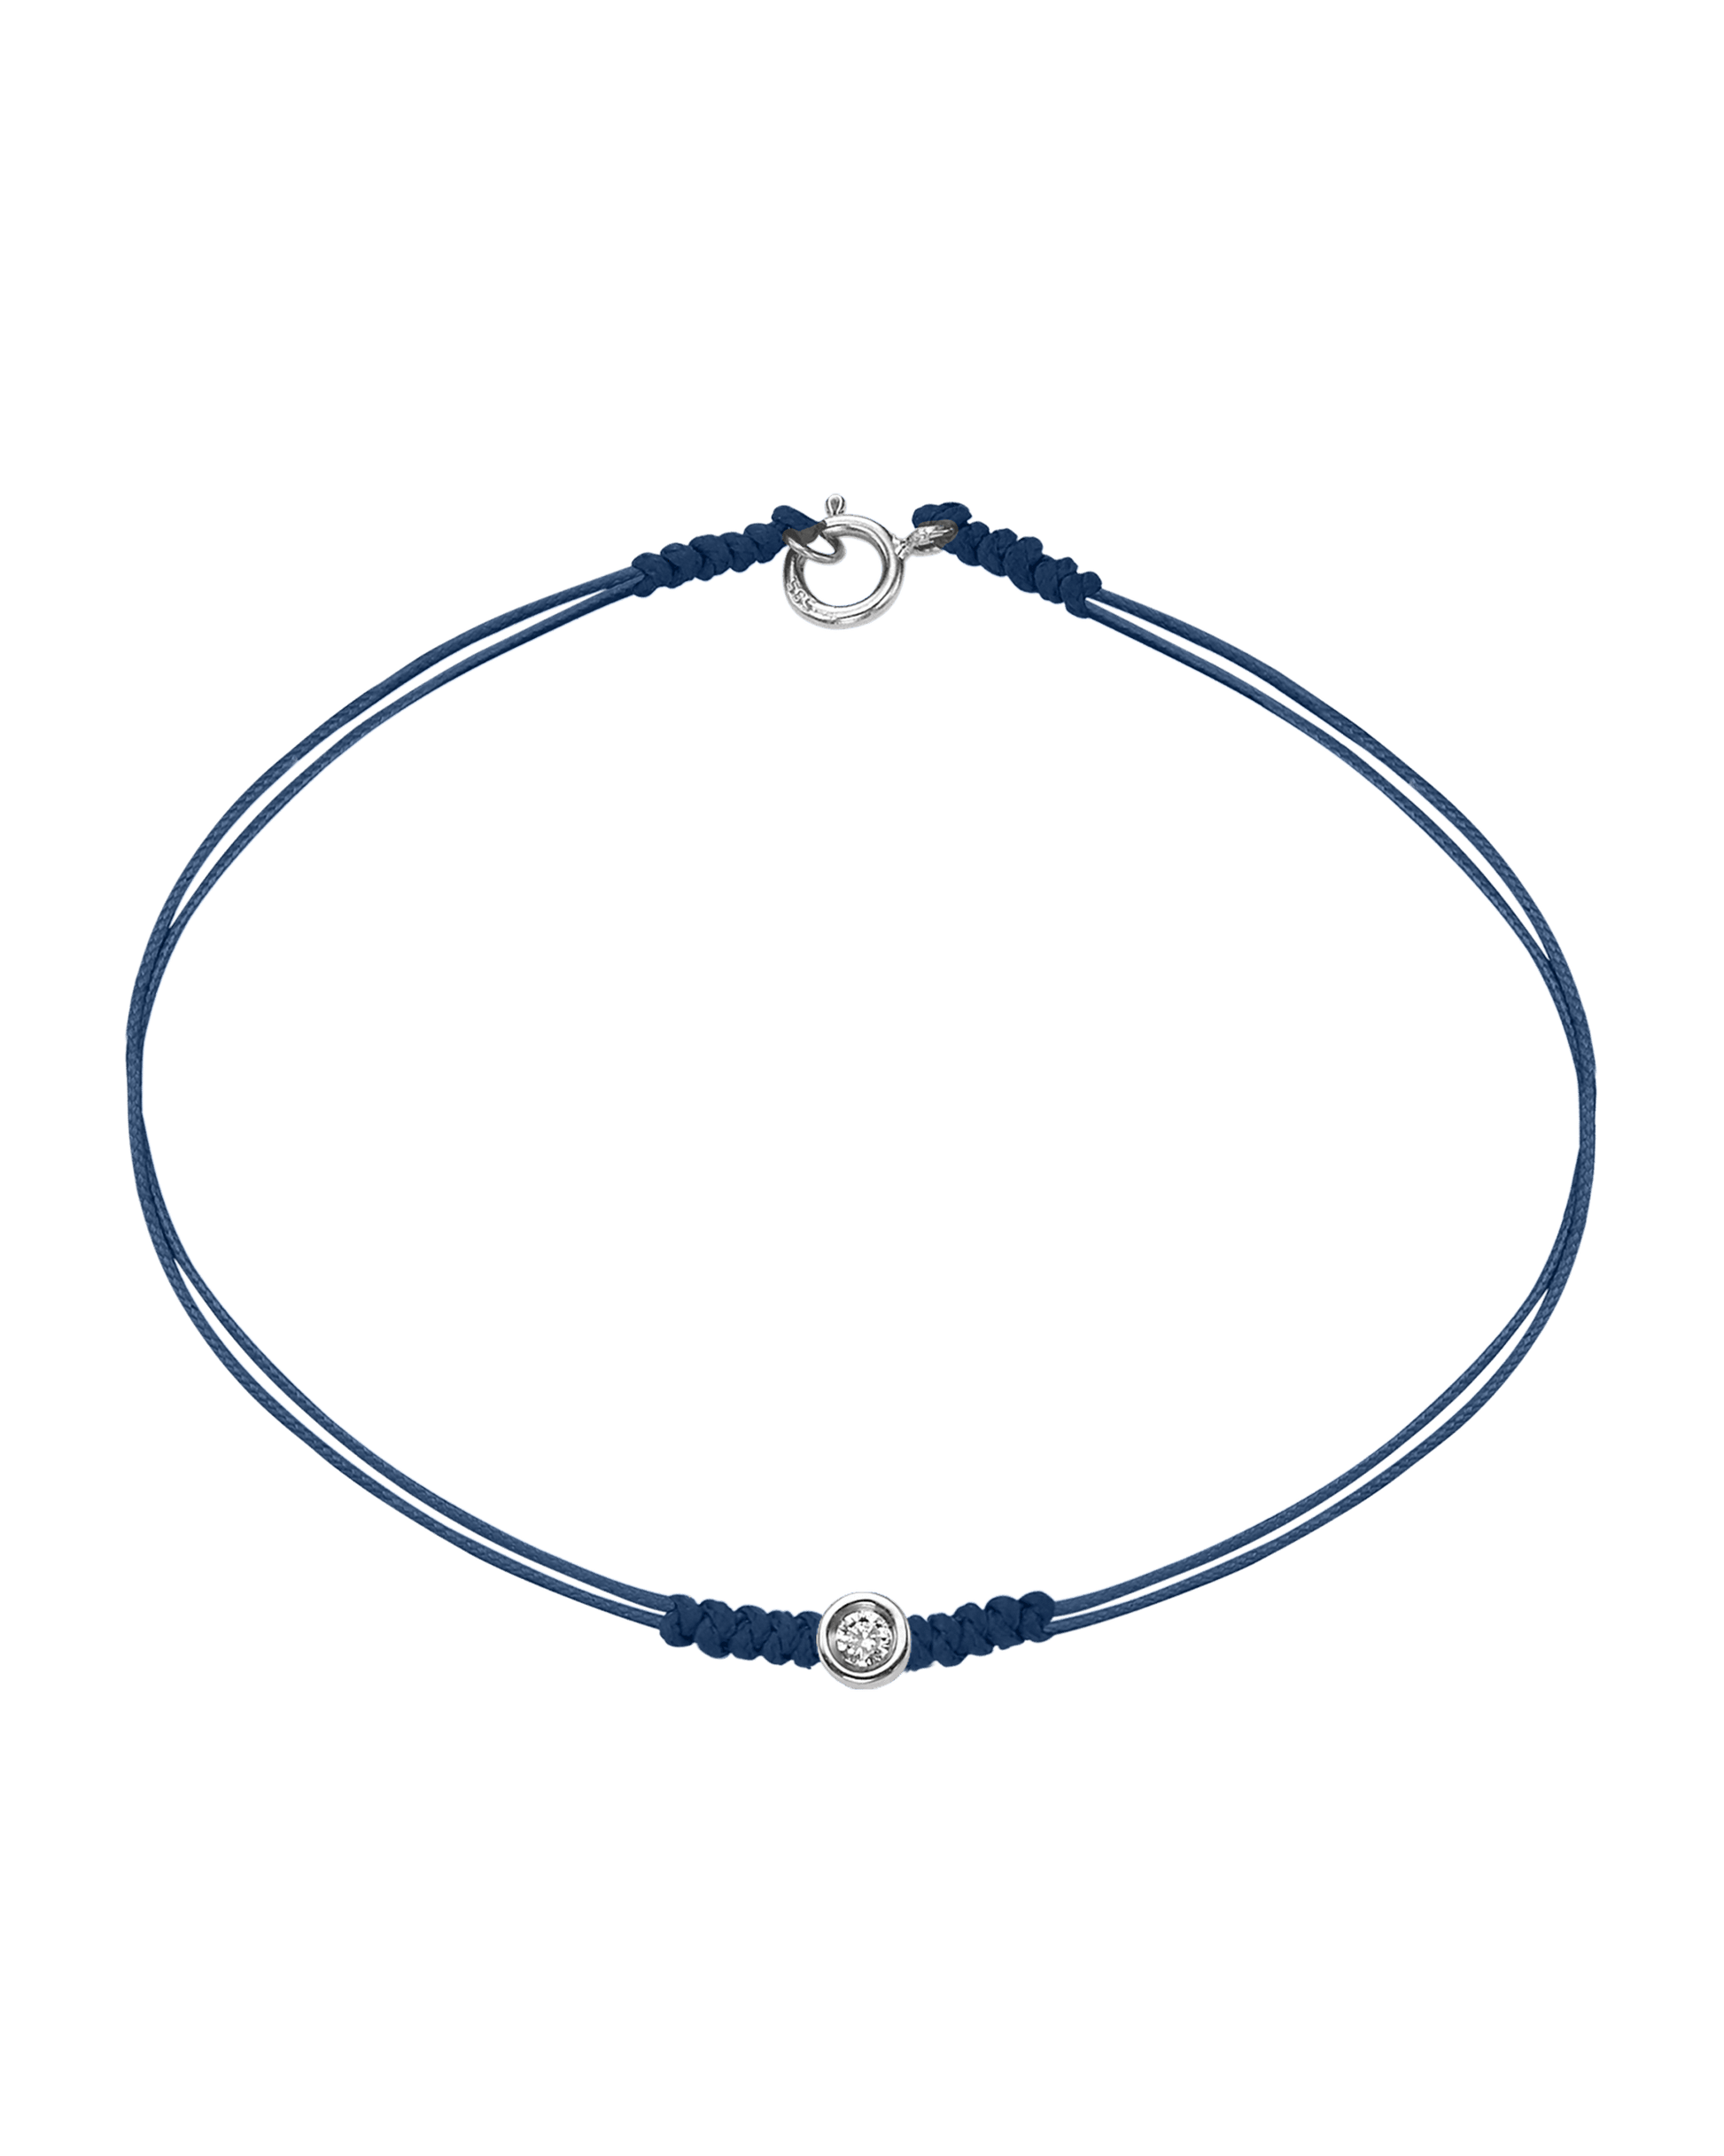 The Classic String of Love with clasp - 14K White Gold Bracelets 14K Solid Gold Indigo Small: 0.03ct Small - 6 Inches (15.5cm)